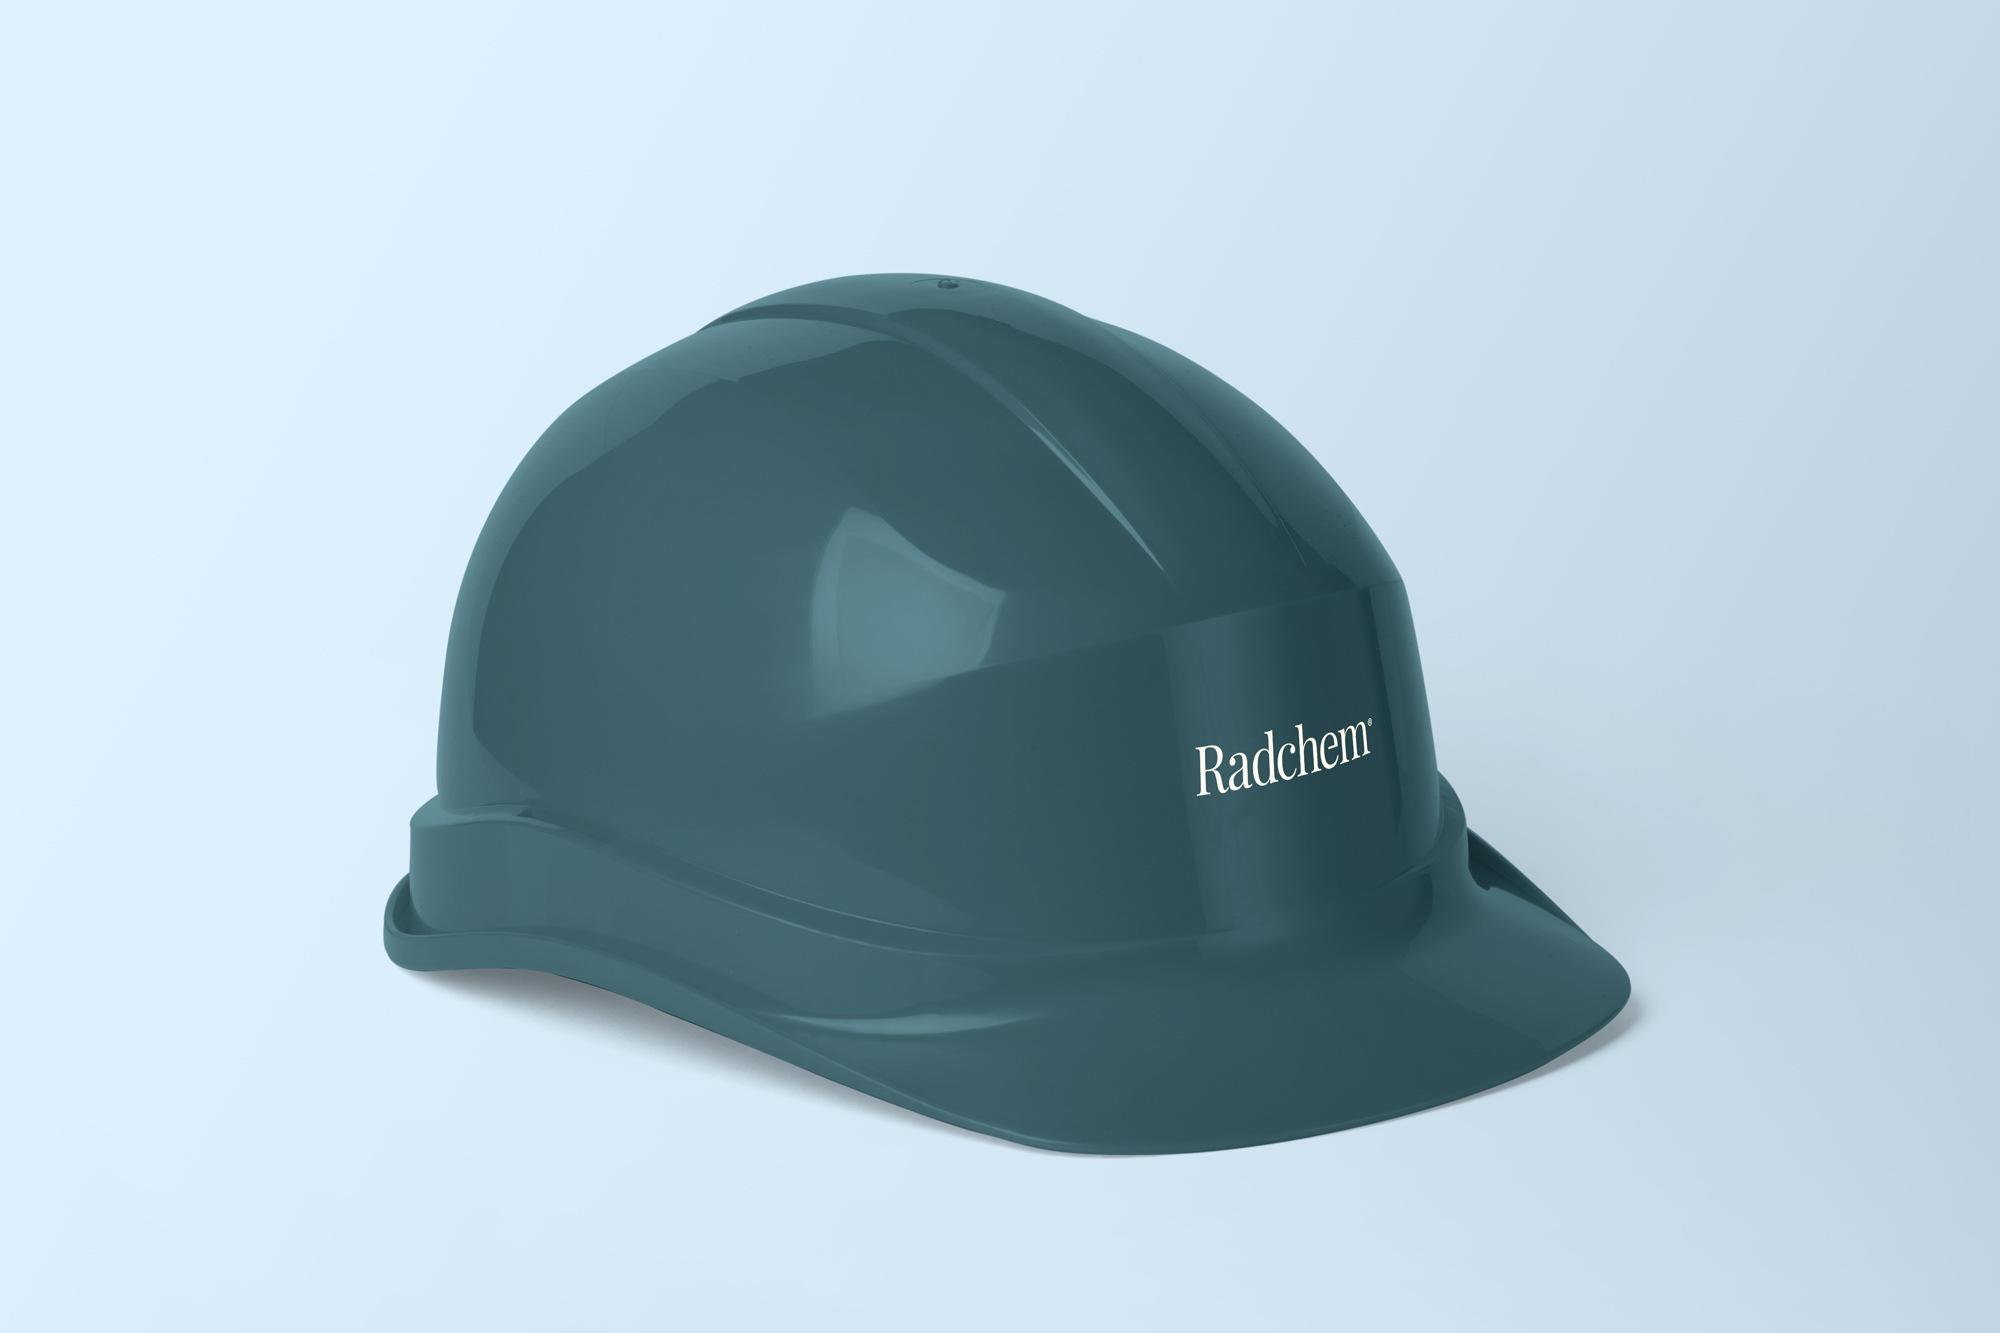 Construction hat with company logo on it.